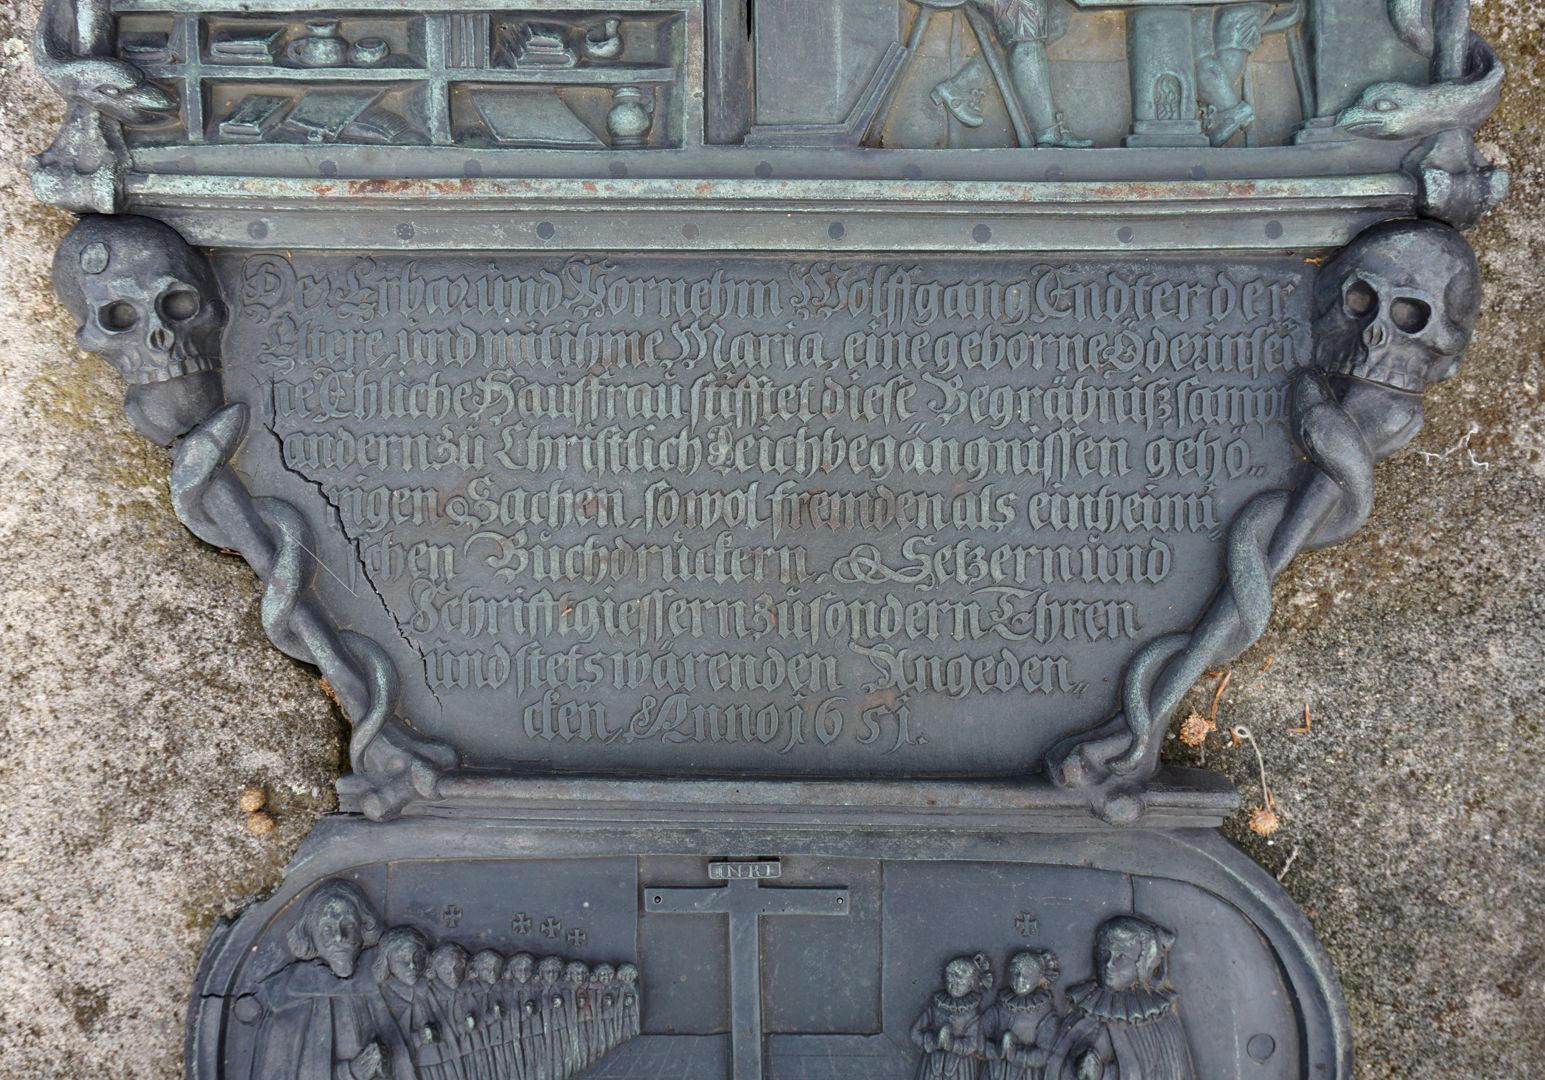 Epitaph of the printers, typesetters and type founder's burial place Donor inscription